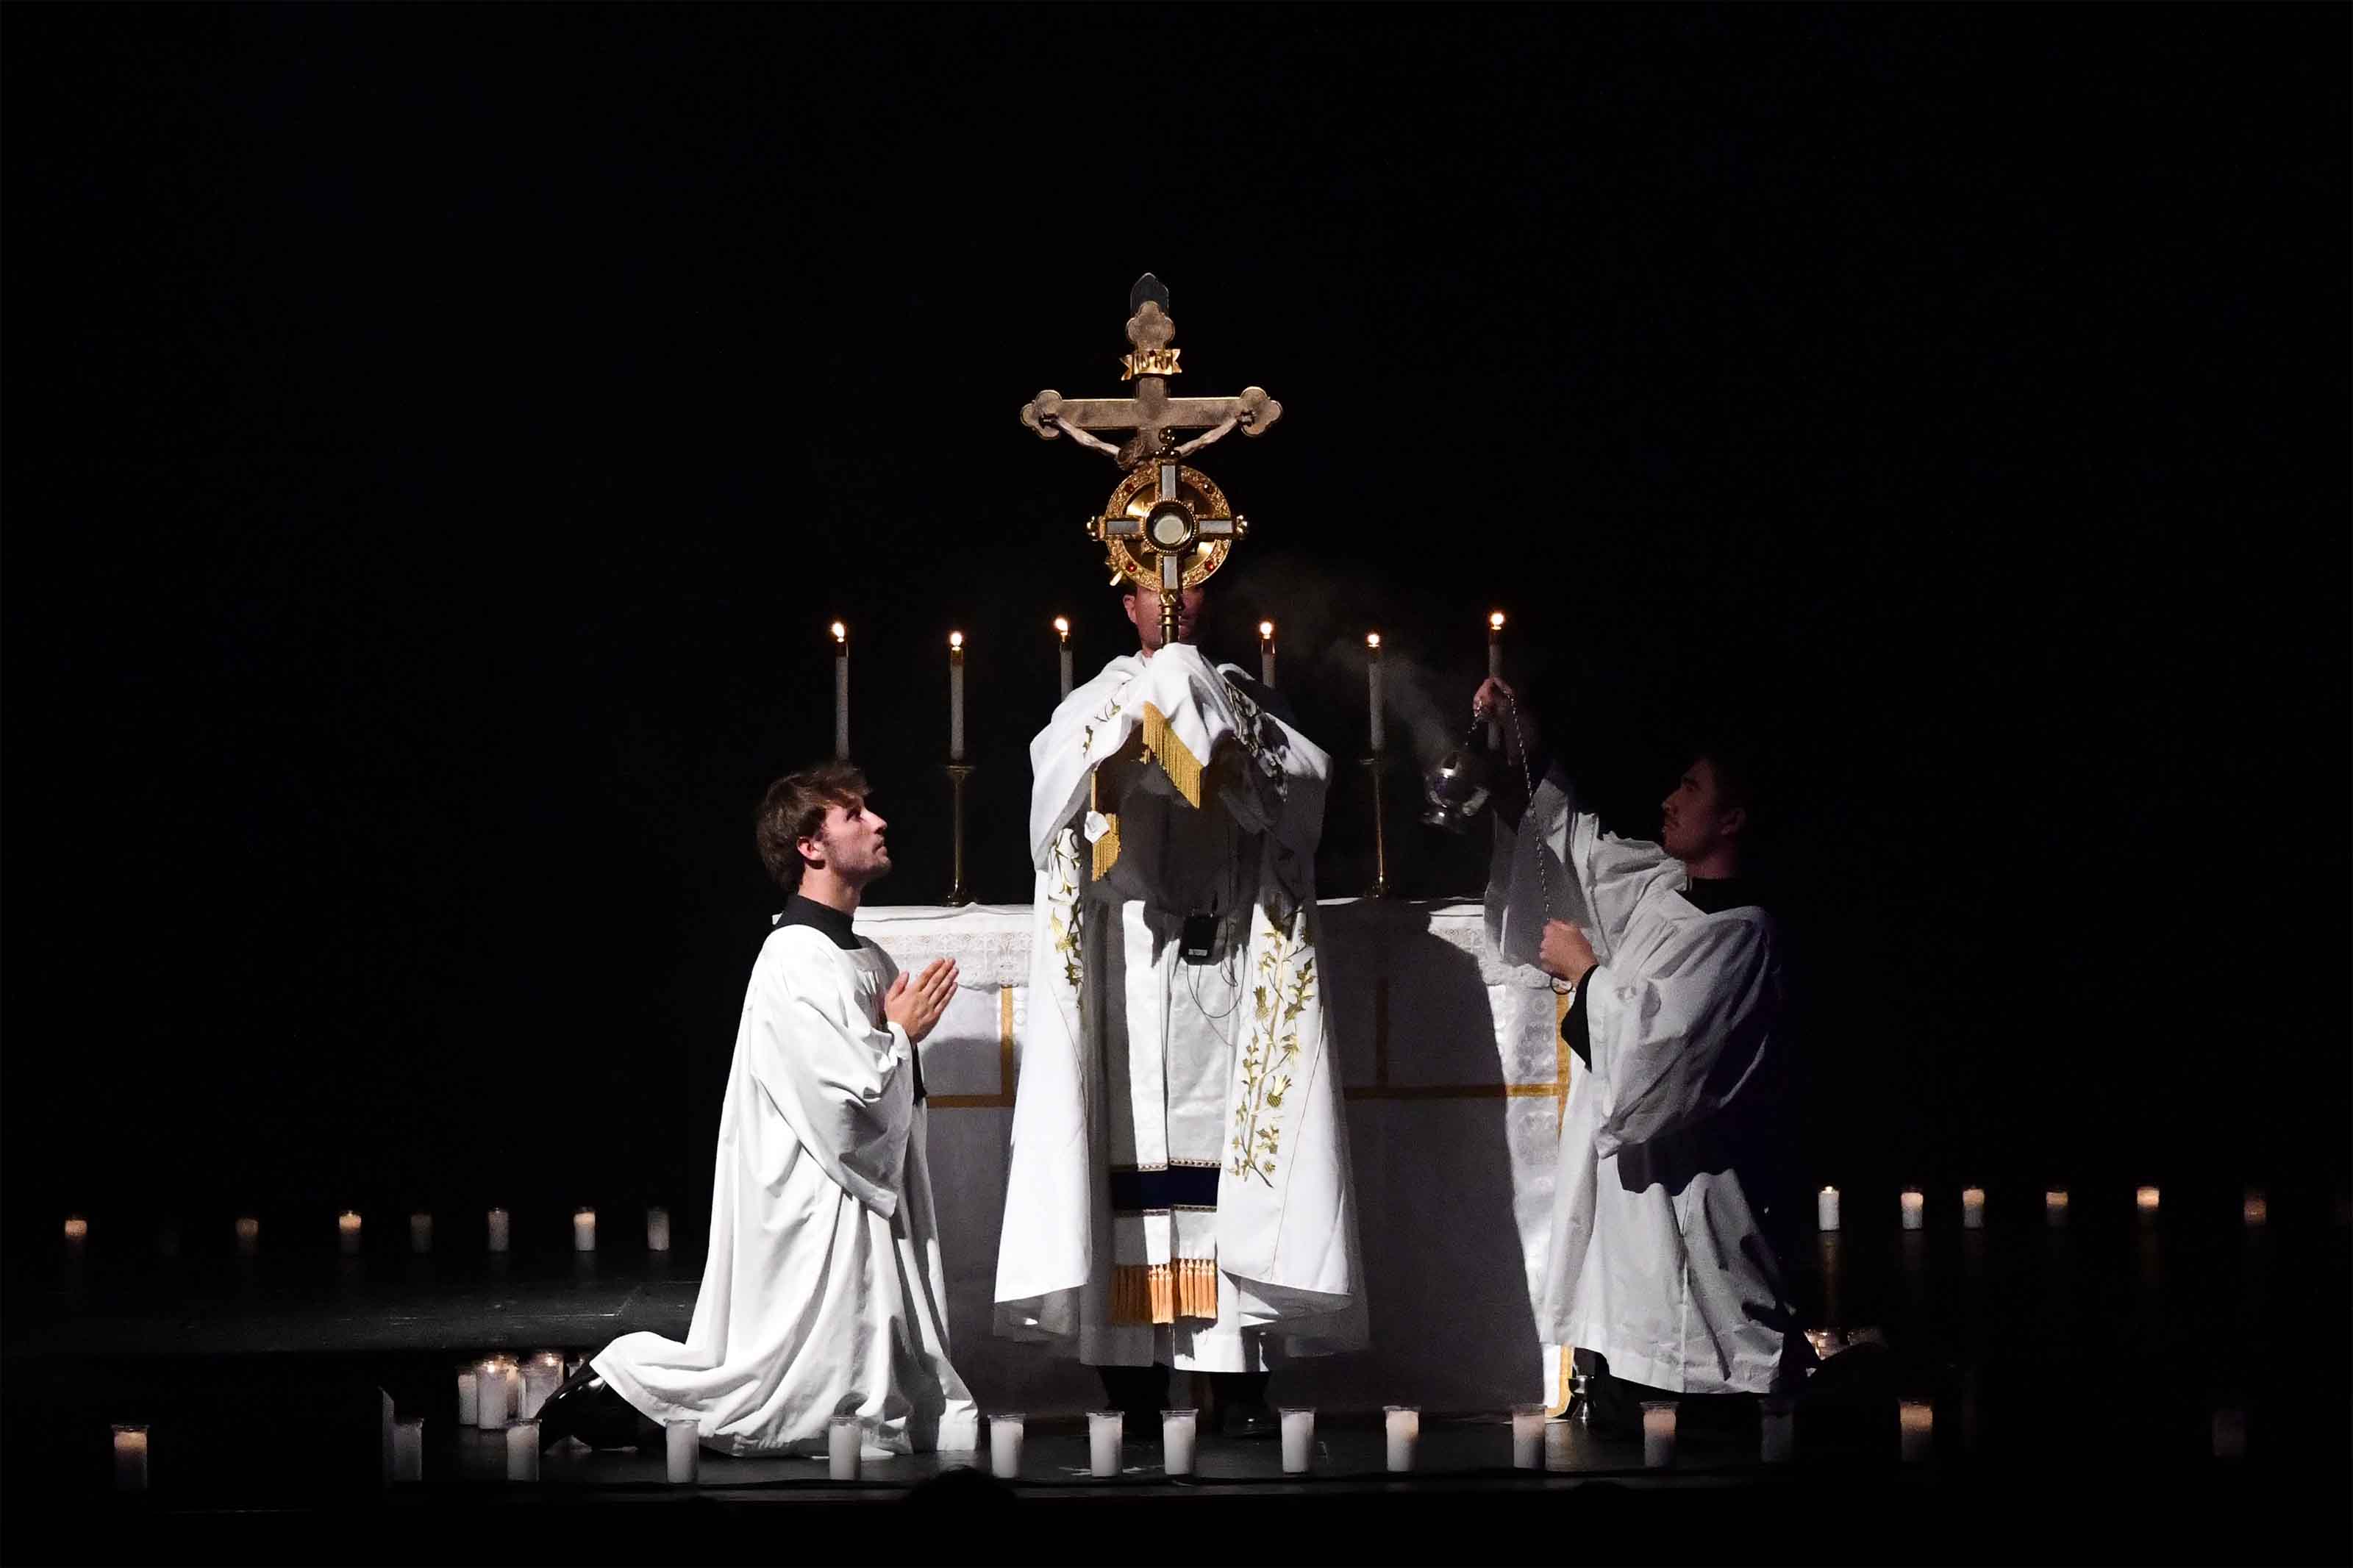 A priest elevates the monstrance during Eucharistic adoration